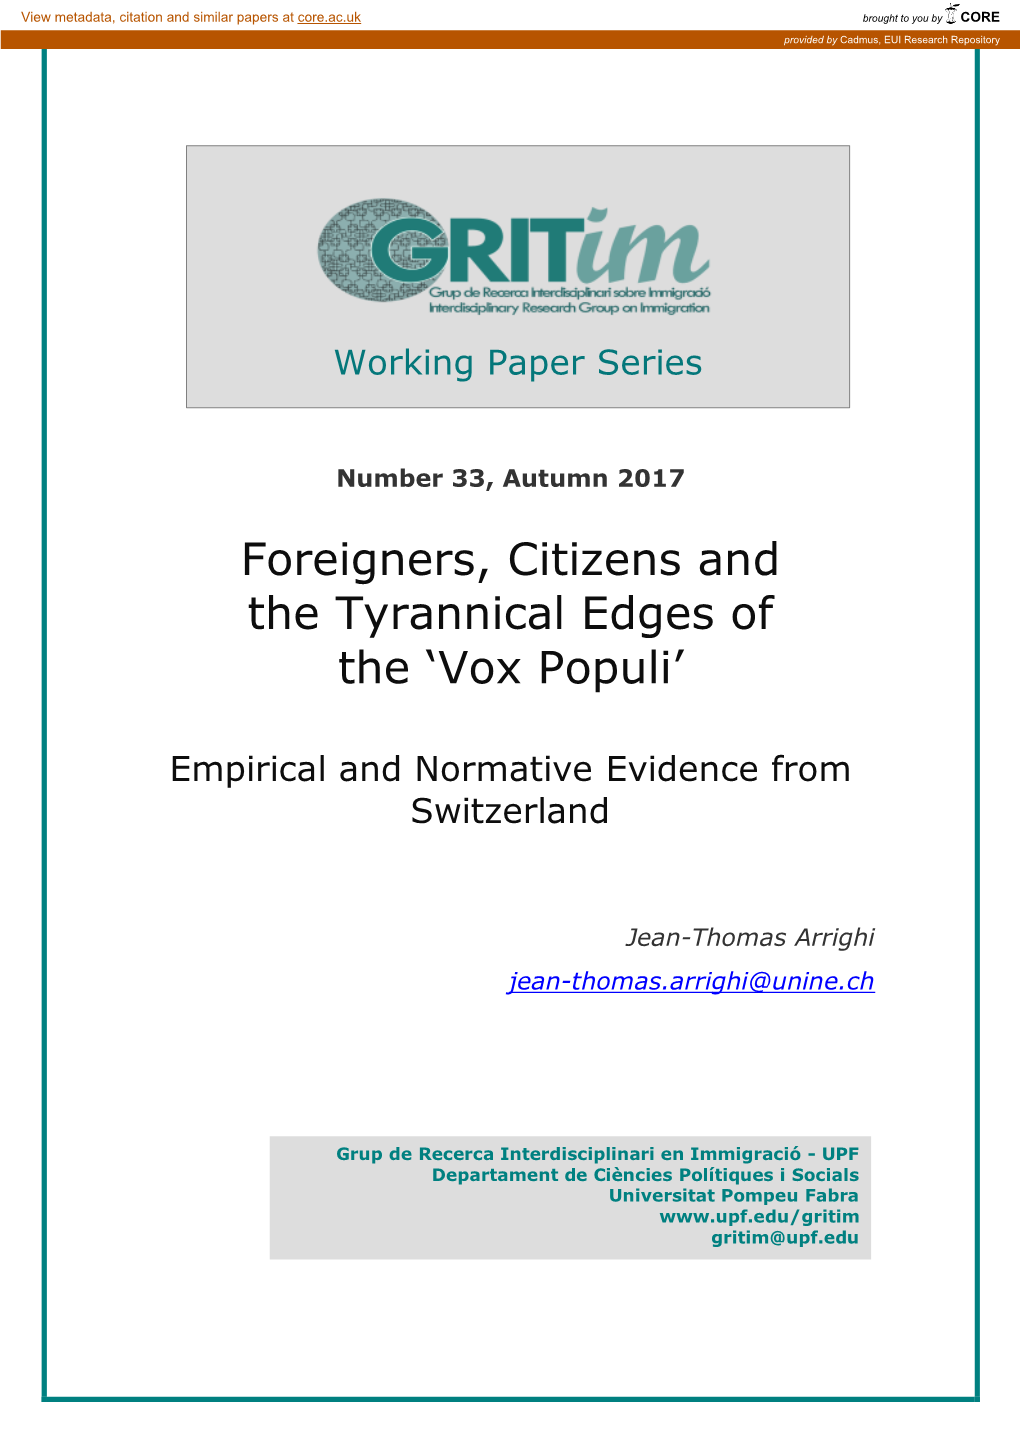 Foreigners, Citizens and the Tyrannical Edges of the ‘Vox Populi’